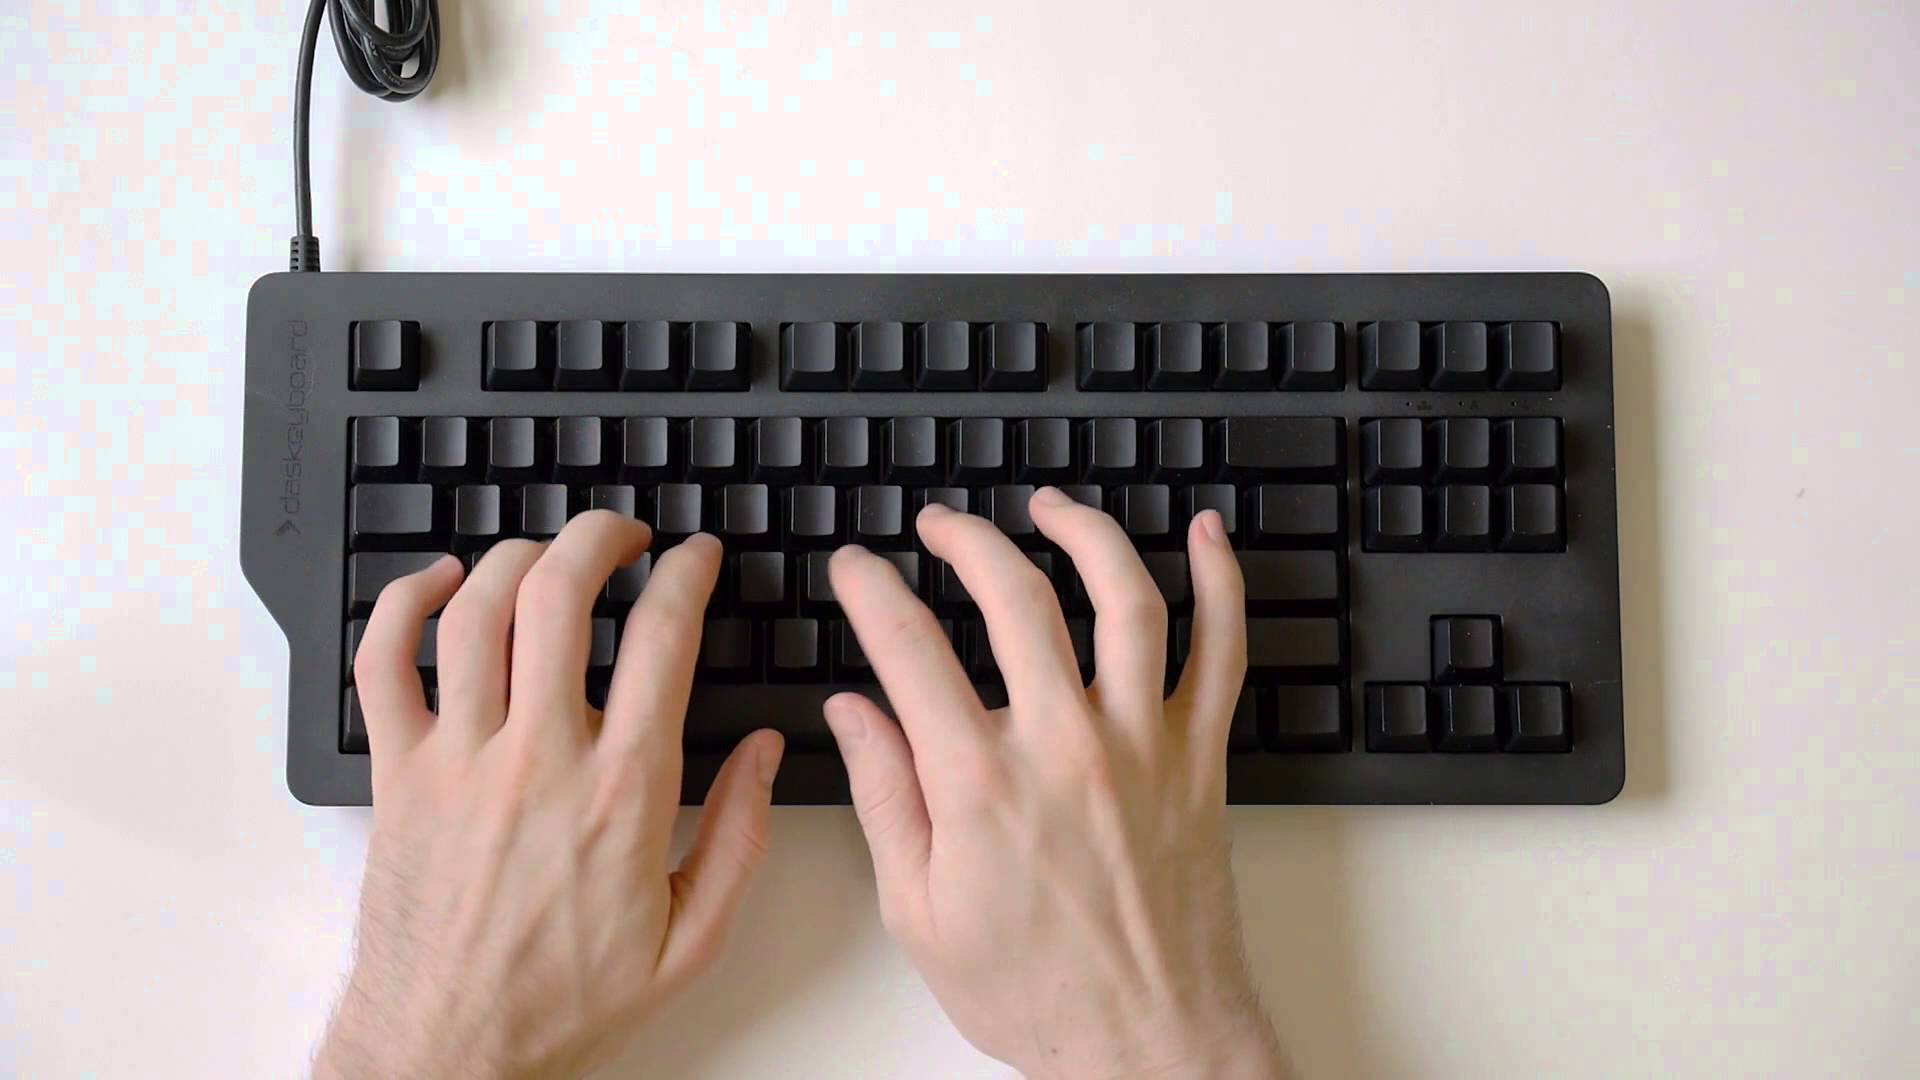 How to join the competitive typing community - Das Keyboard